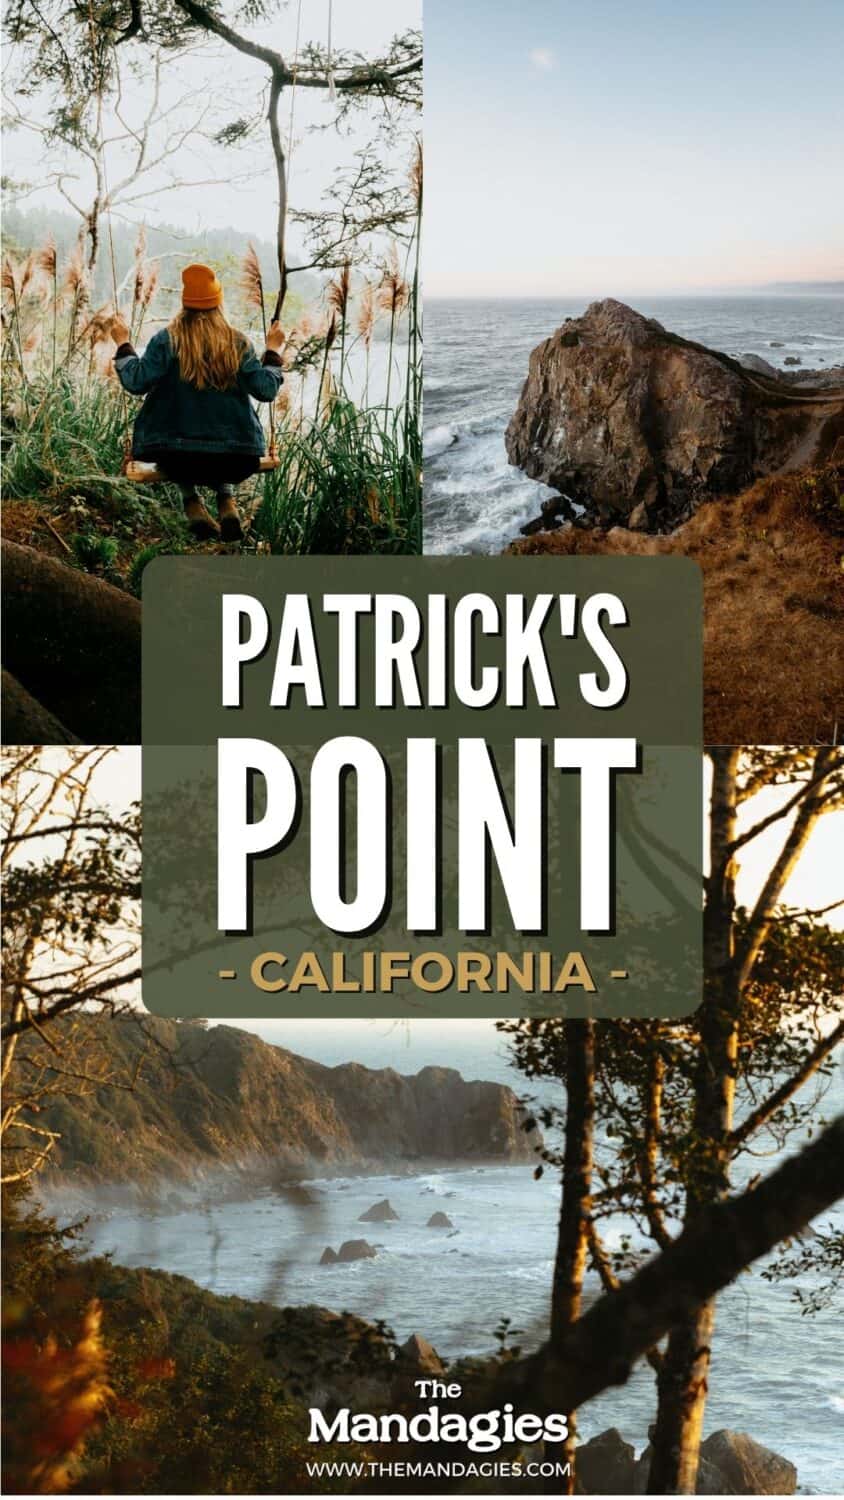 Patrick's Point State Park is one of the most beautiful places to see the California Coast! With sea stacks, epic sunsets, and incredible Northern California coast views, there's beaches, hikes, and hidden lookouts for everyone! We're covering Wedding Rock, Sumeg Village, Redwoods, Agate Beach and more! #california #redwoods #weddingrock #Roadtrip #northerncalifornia #l #CA #PCH #PCW #pacificoasthighway #travel #USAtravel #sanfrancisco #photography #sunset #highway101